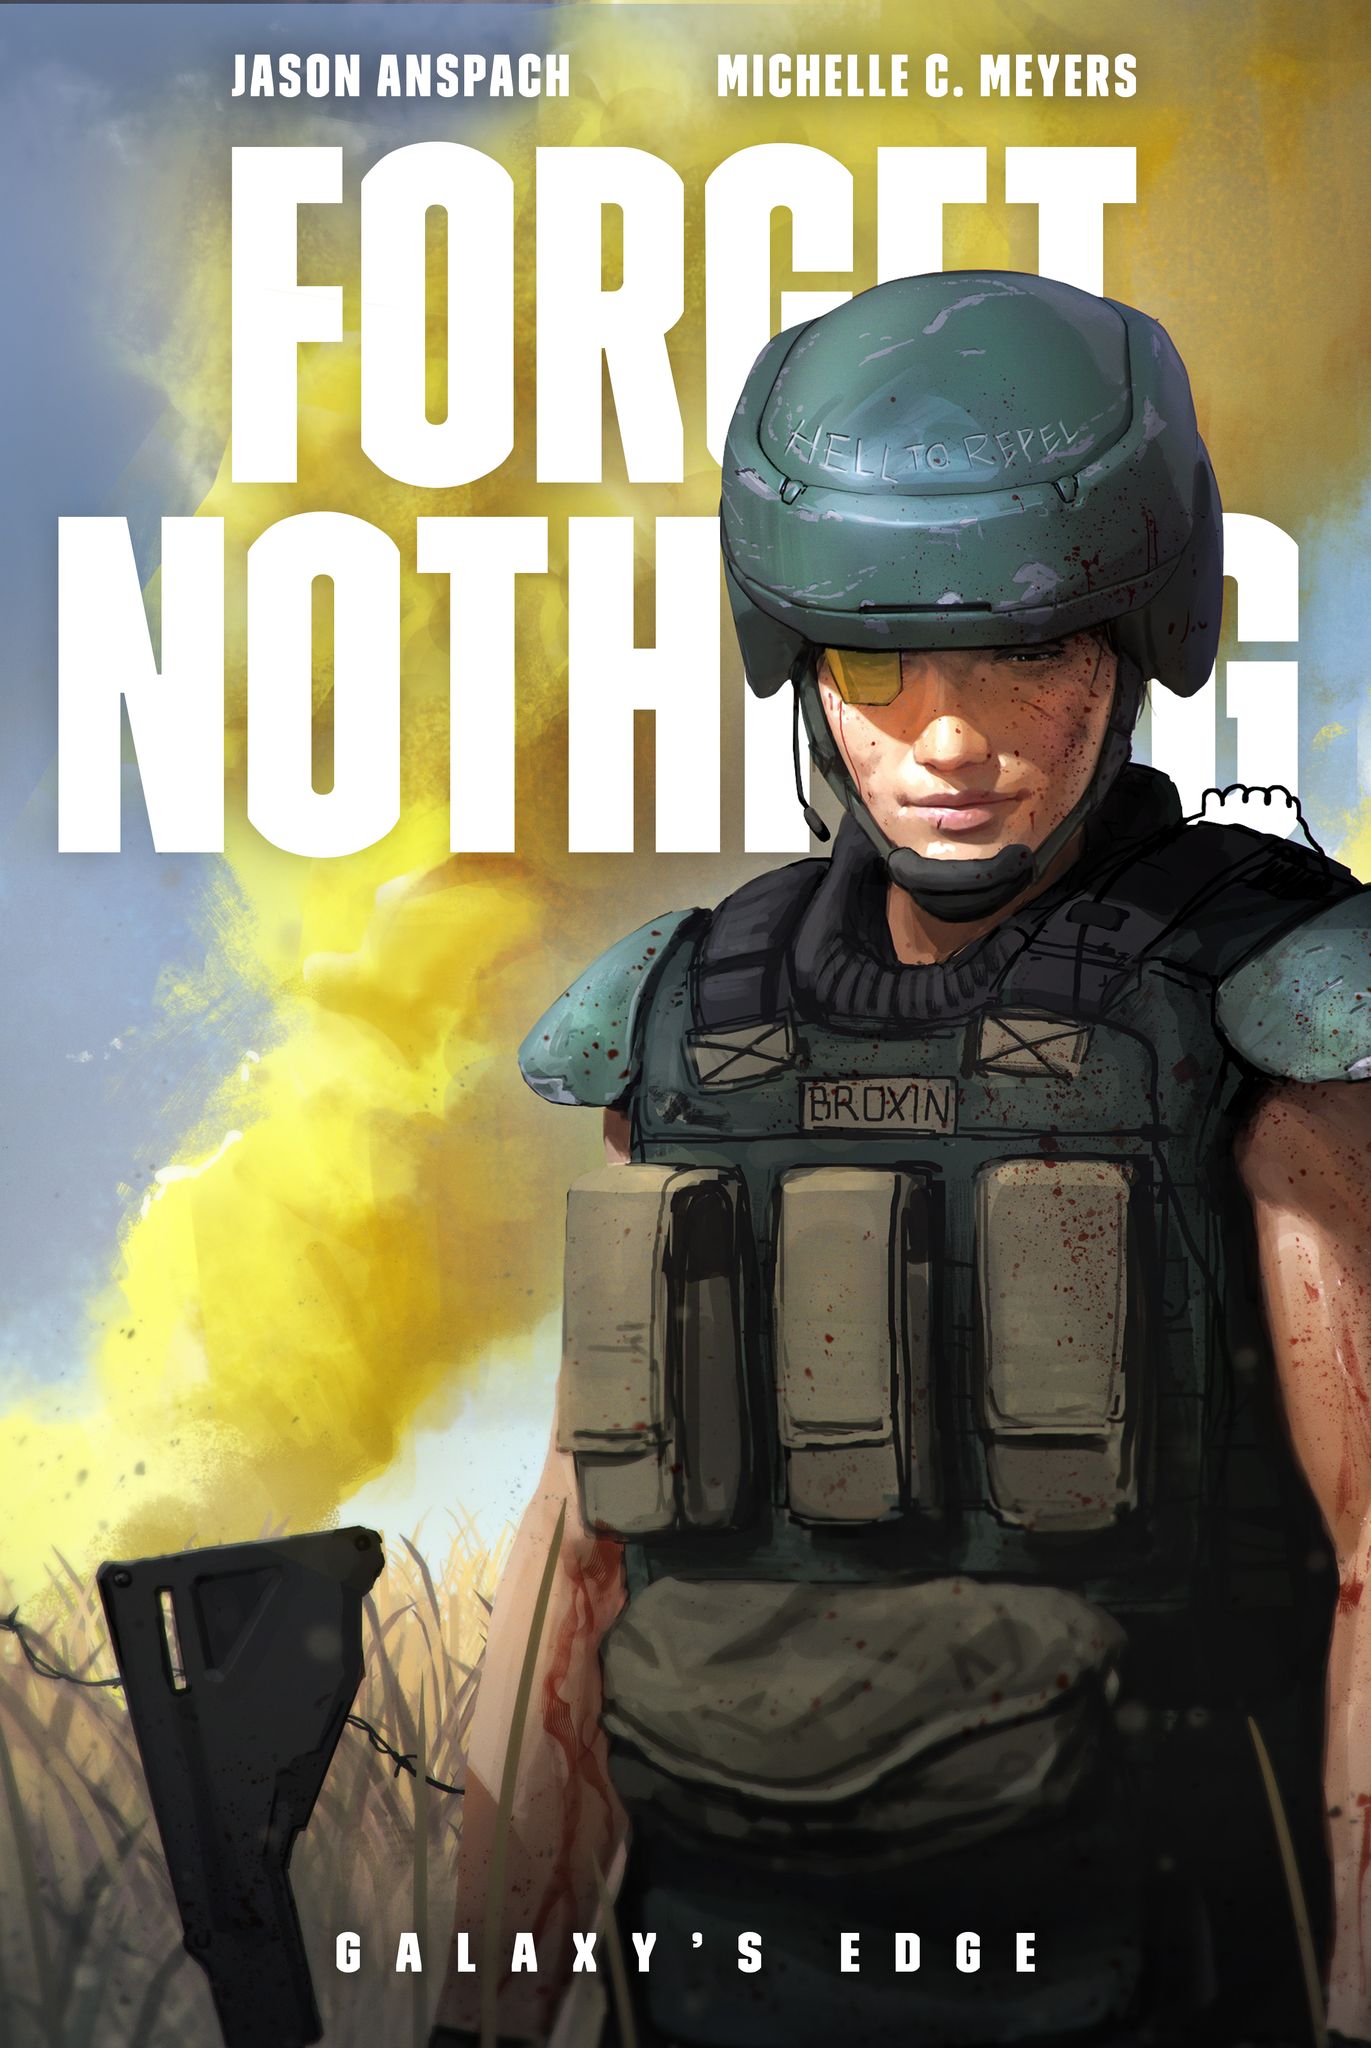 Forget Nothing ebook